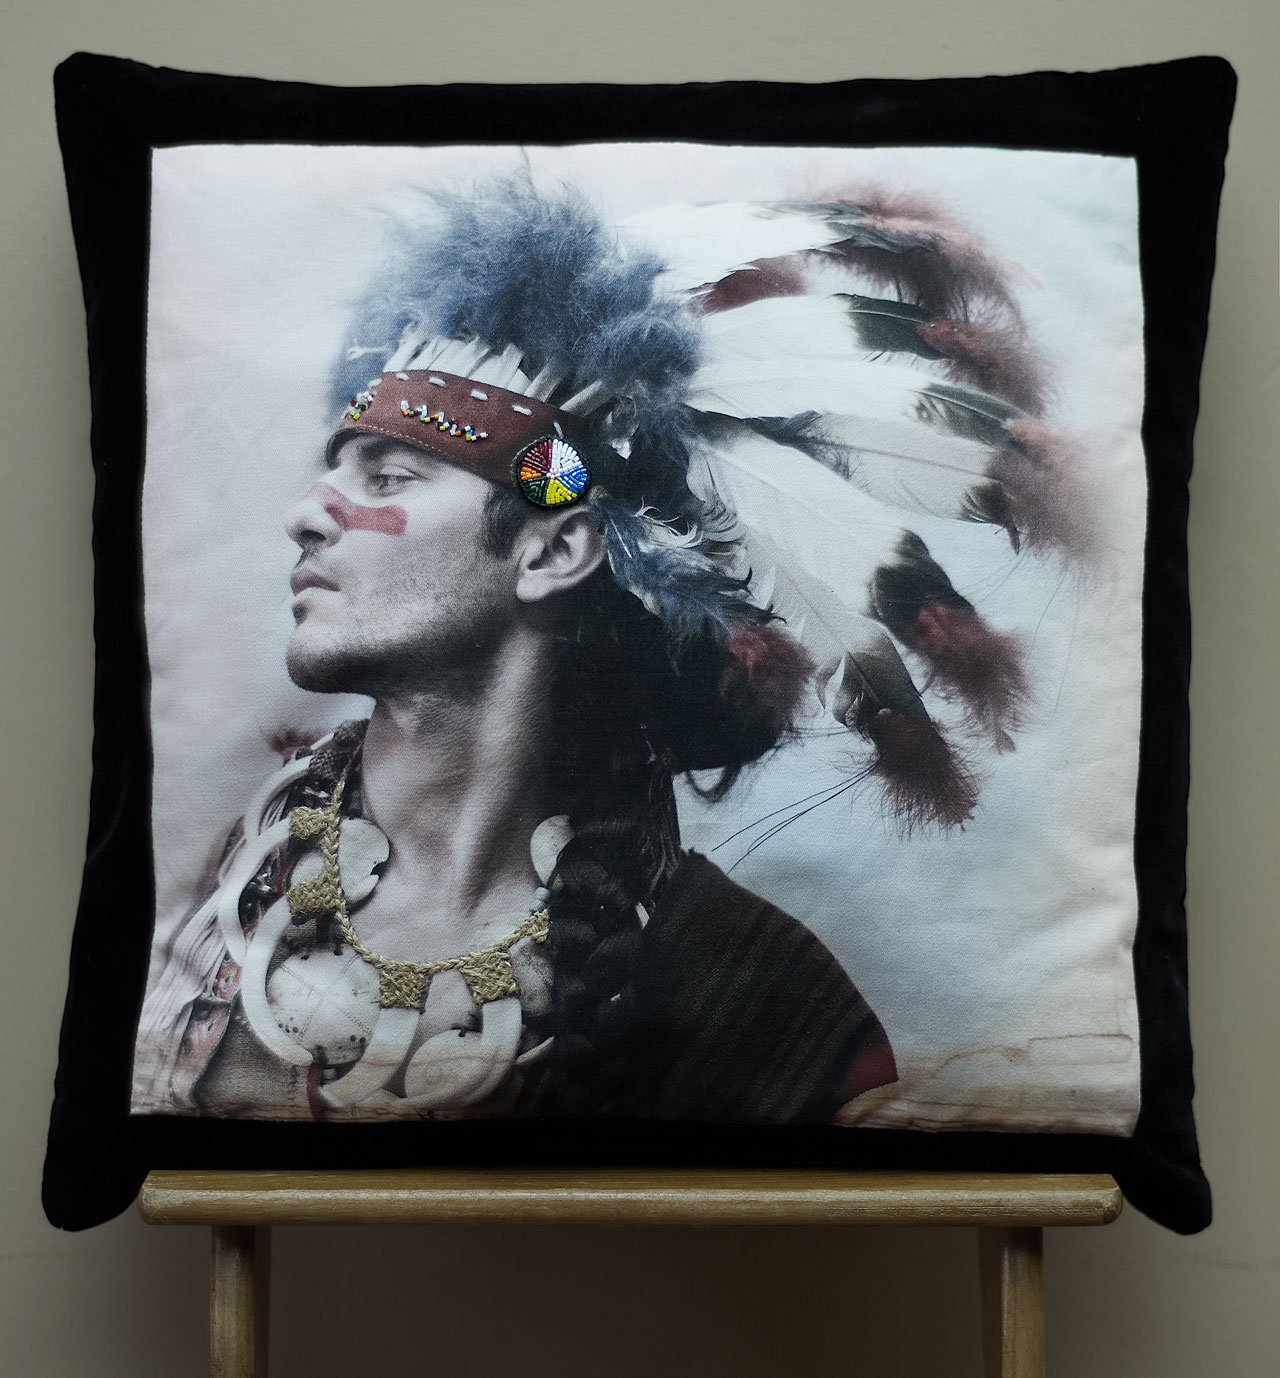 A Voyage Within (Embroidered Pillows) | INDIAN MOOD.Vangelis Kyris in collaboration with Anatoli Georgiev.Print on 100% cotton, hand-embroidered, velvet backgraound | 50 x 50 cm , 19 11/16 x 19 11/16 in.EDITION OF 50.Courtesy of the artists.